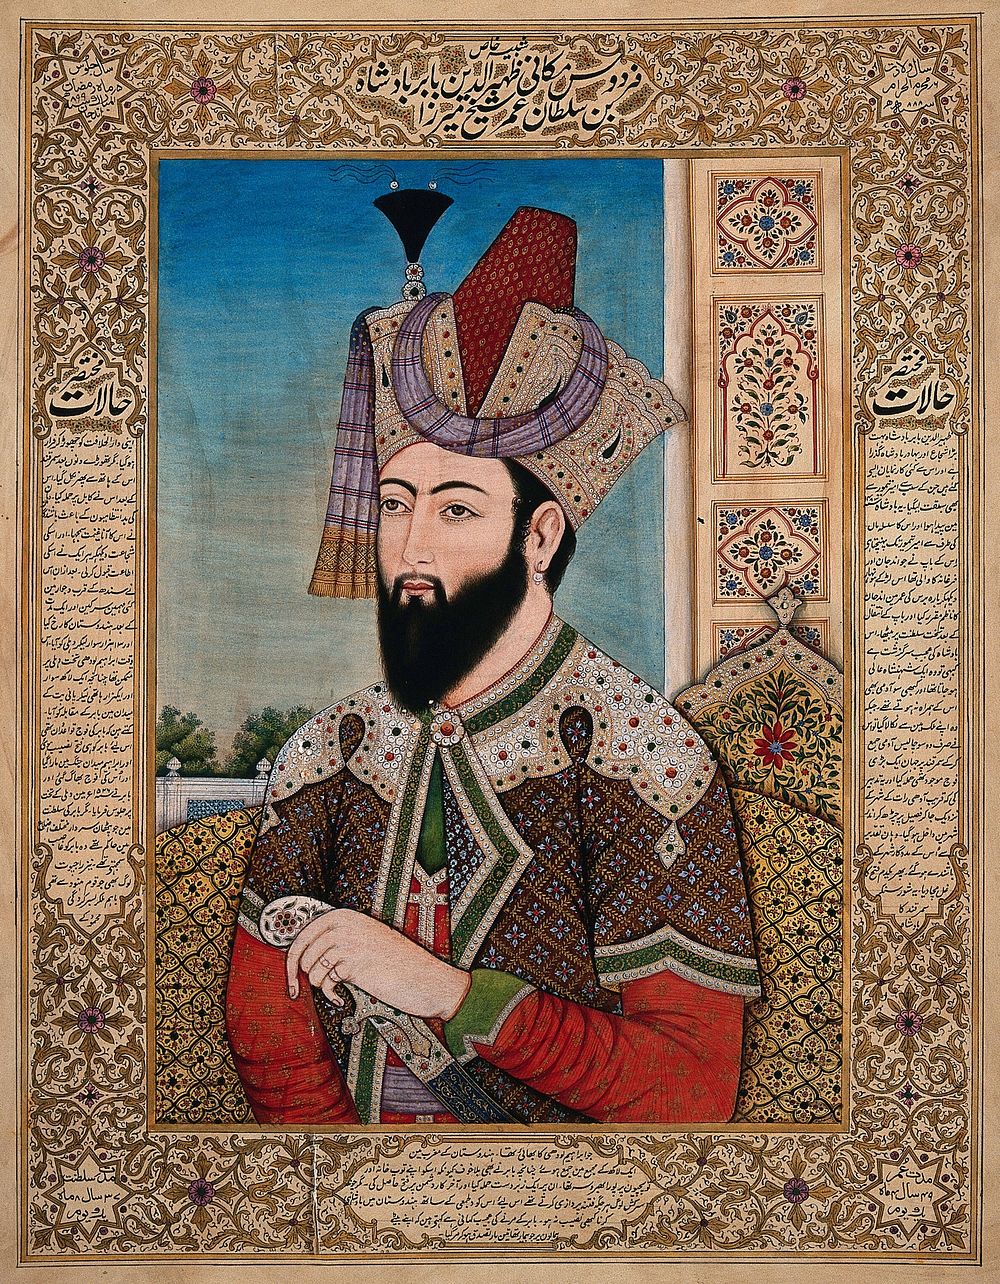 A Mughal emperor or member of a royal family. Gouache painting by an Indian painter.